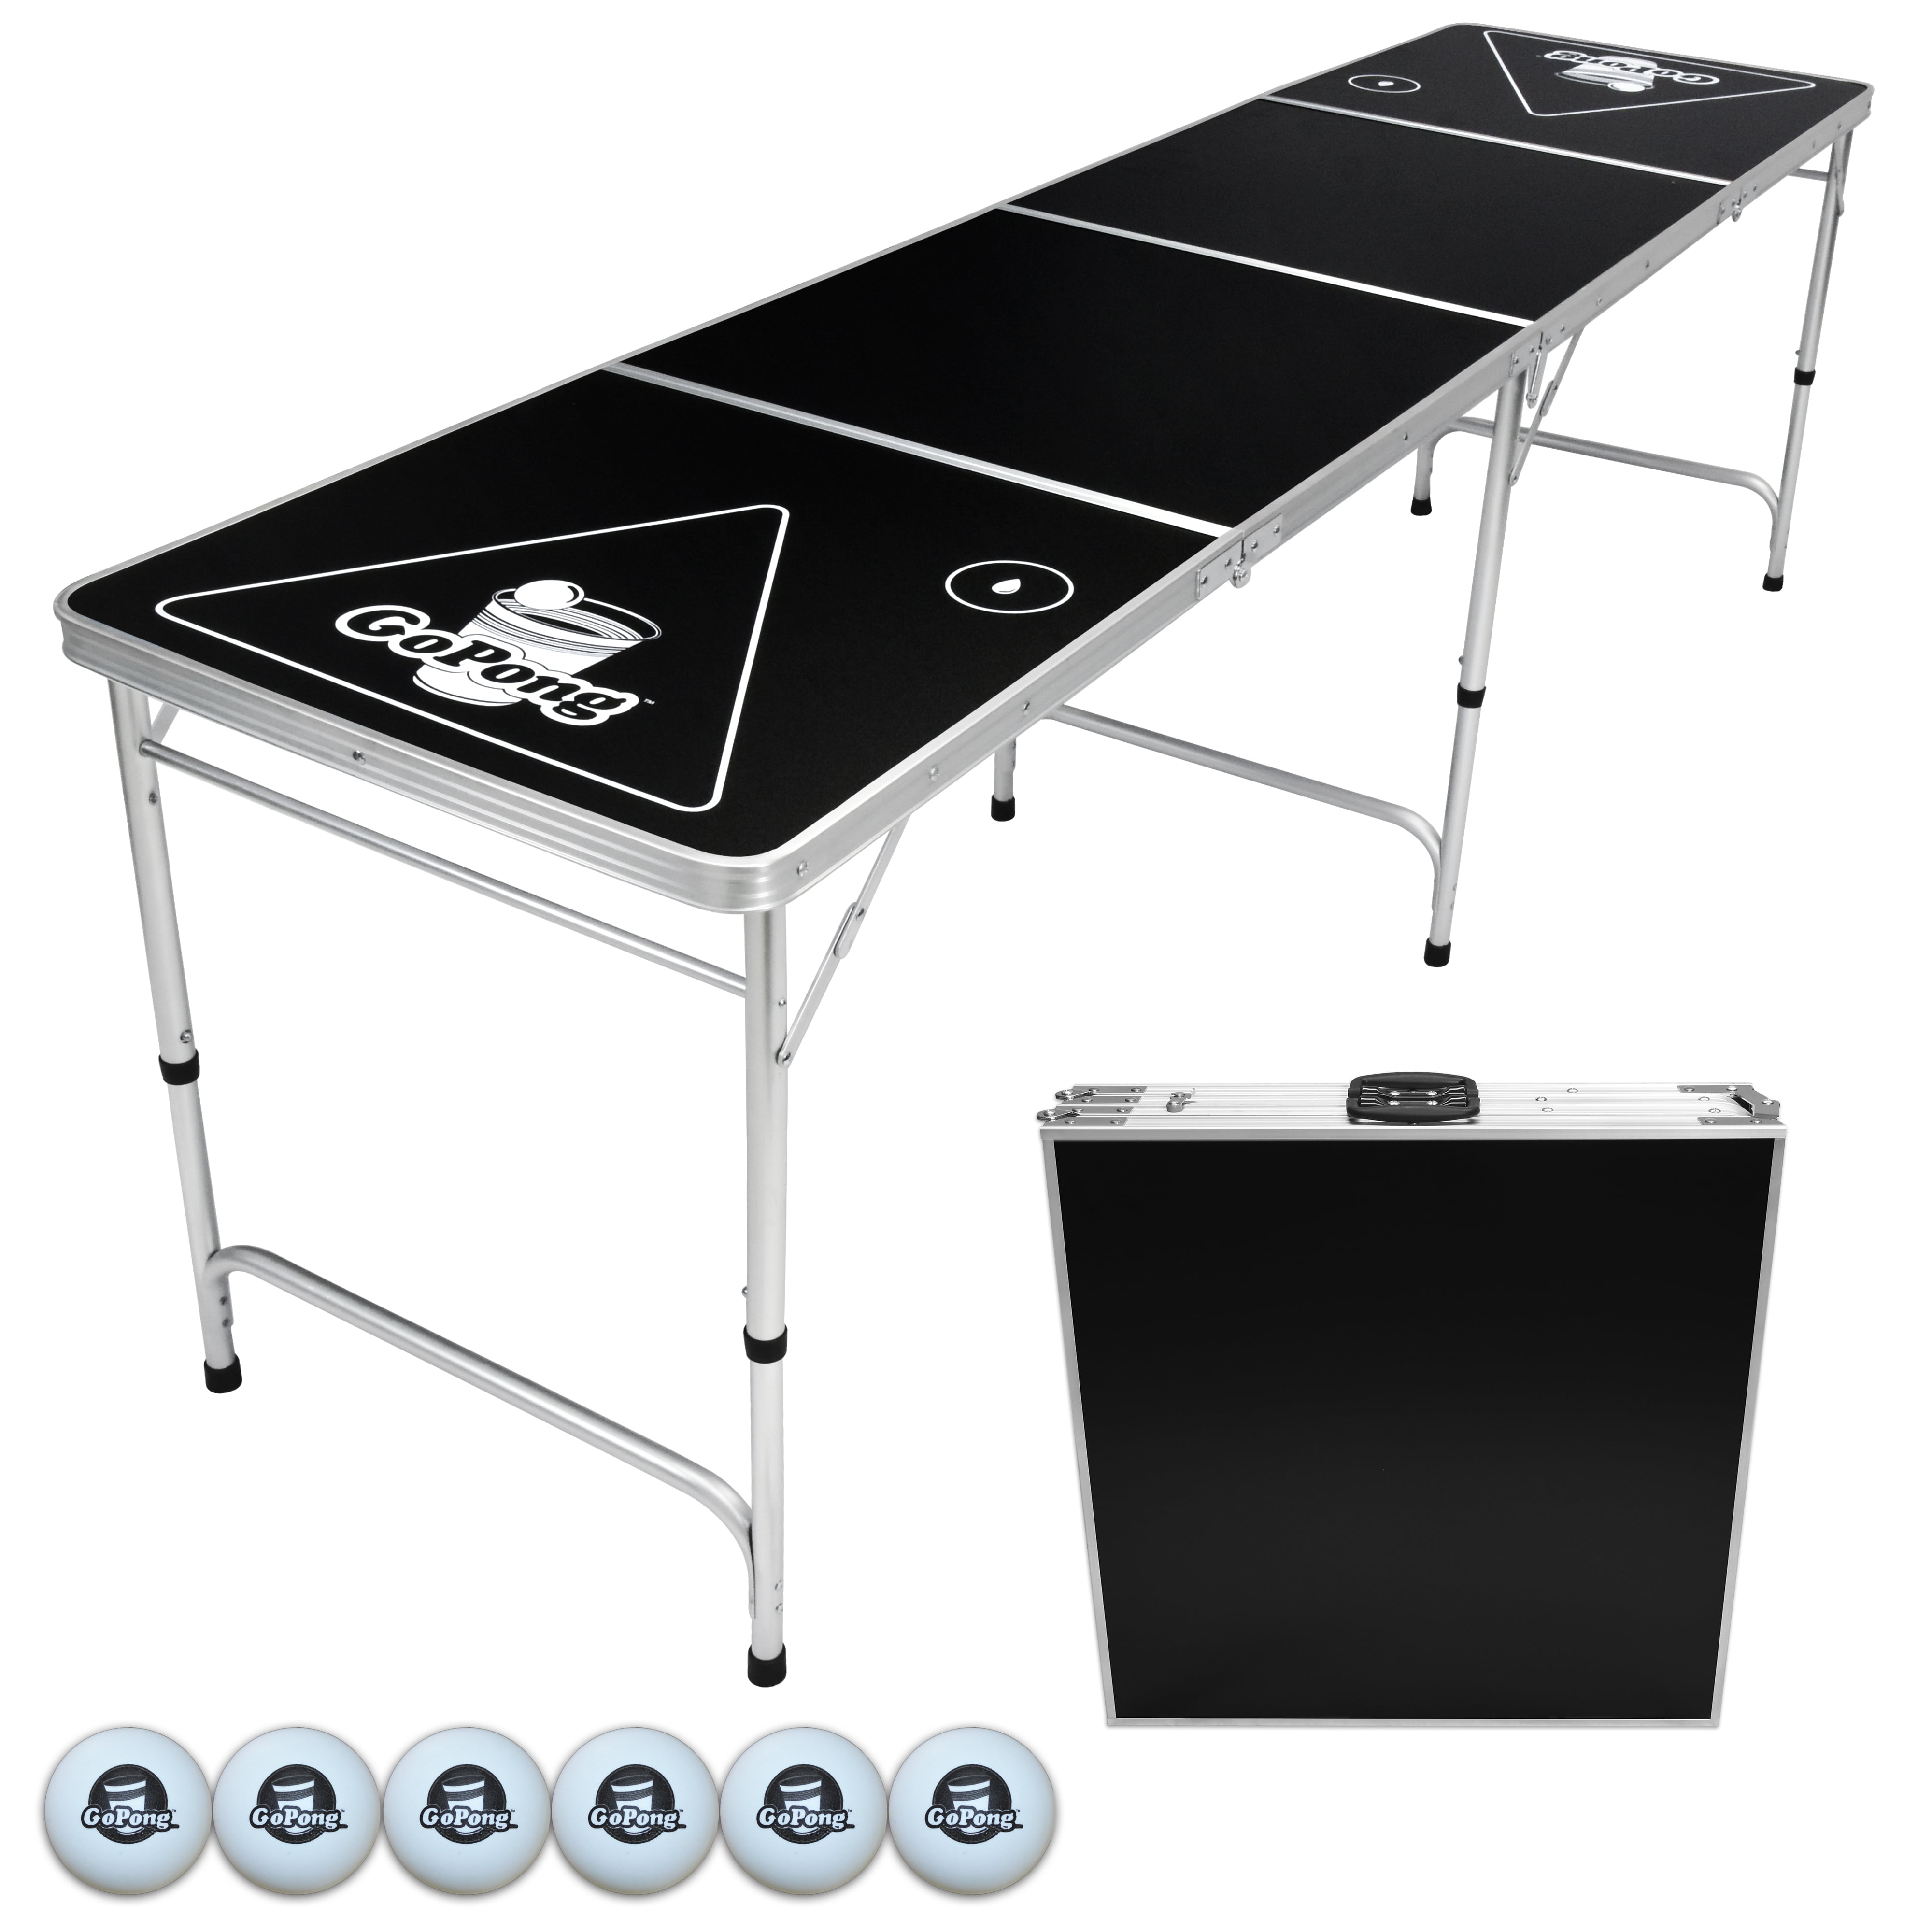 Wido Beer Pong Table Official Size Folding Portable Party Drinking Game 8FT Adults Beerpong